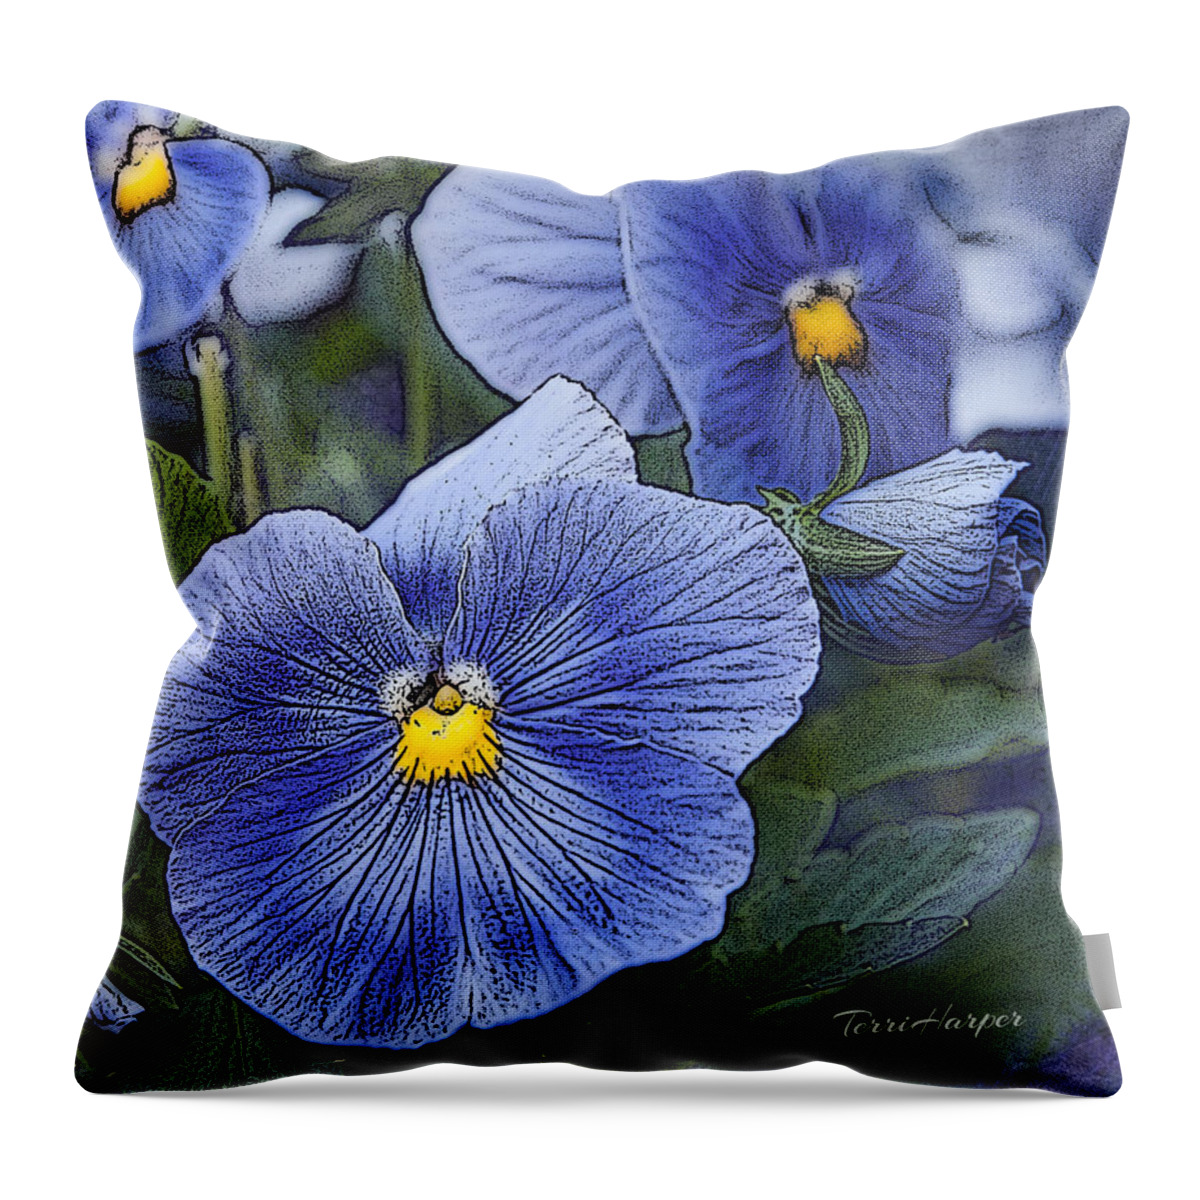 Blue Throw Pillow featuring the photograph Blue Ladies by Terri Harper